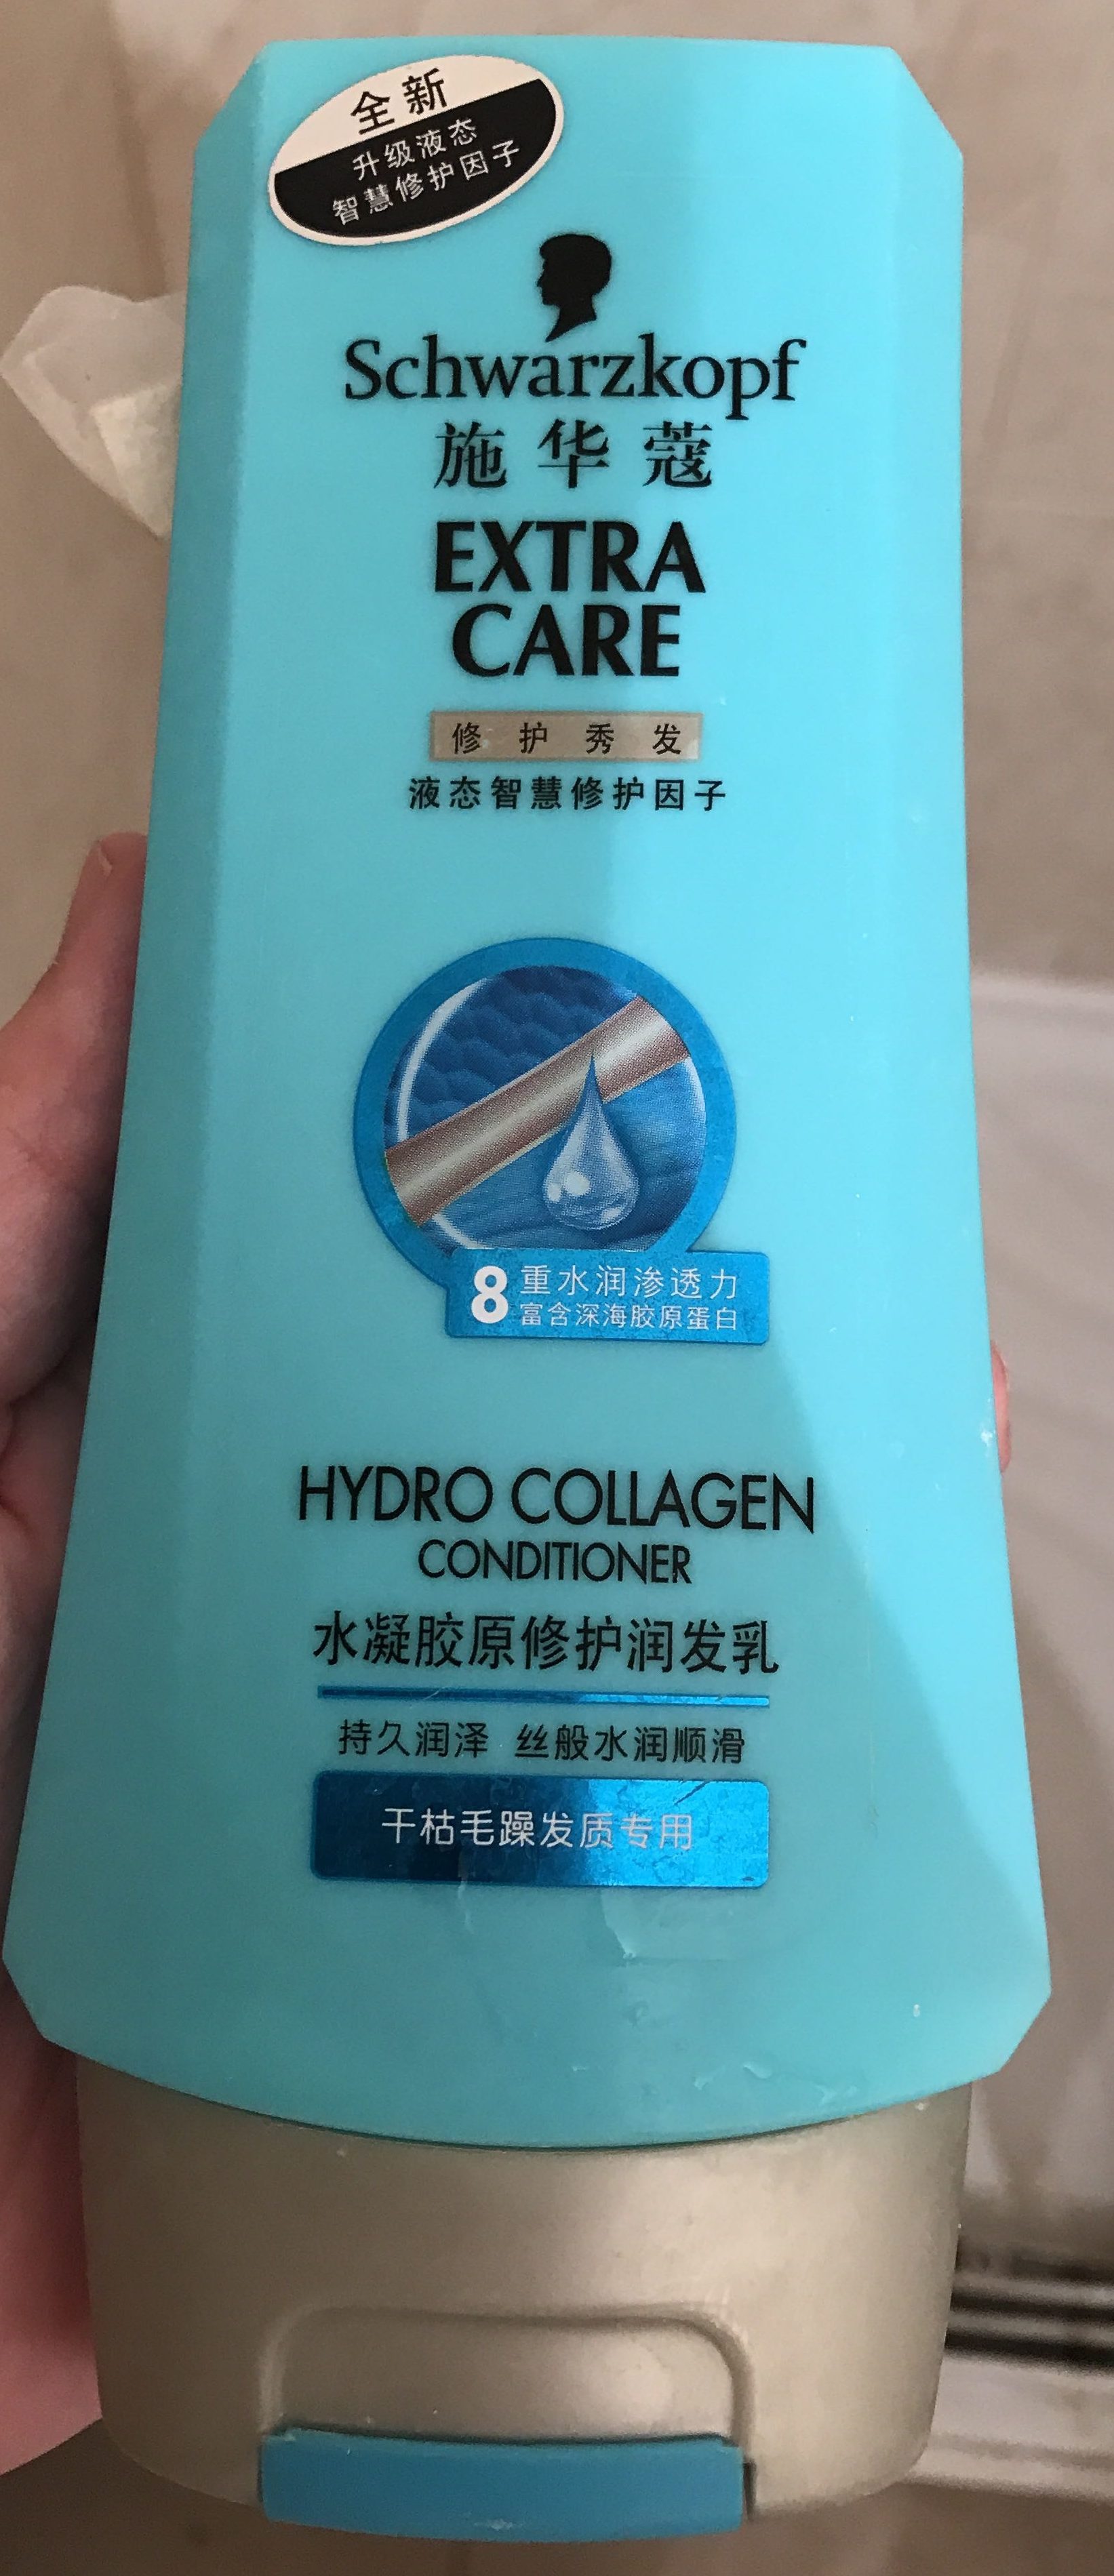 Extra Care 修护润发 Hydro Collagen Conditioner - Produkt - zh